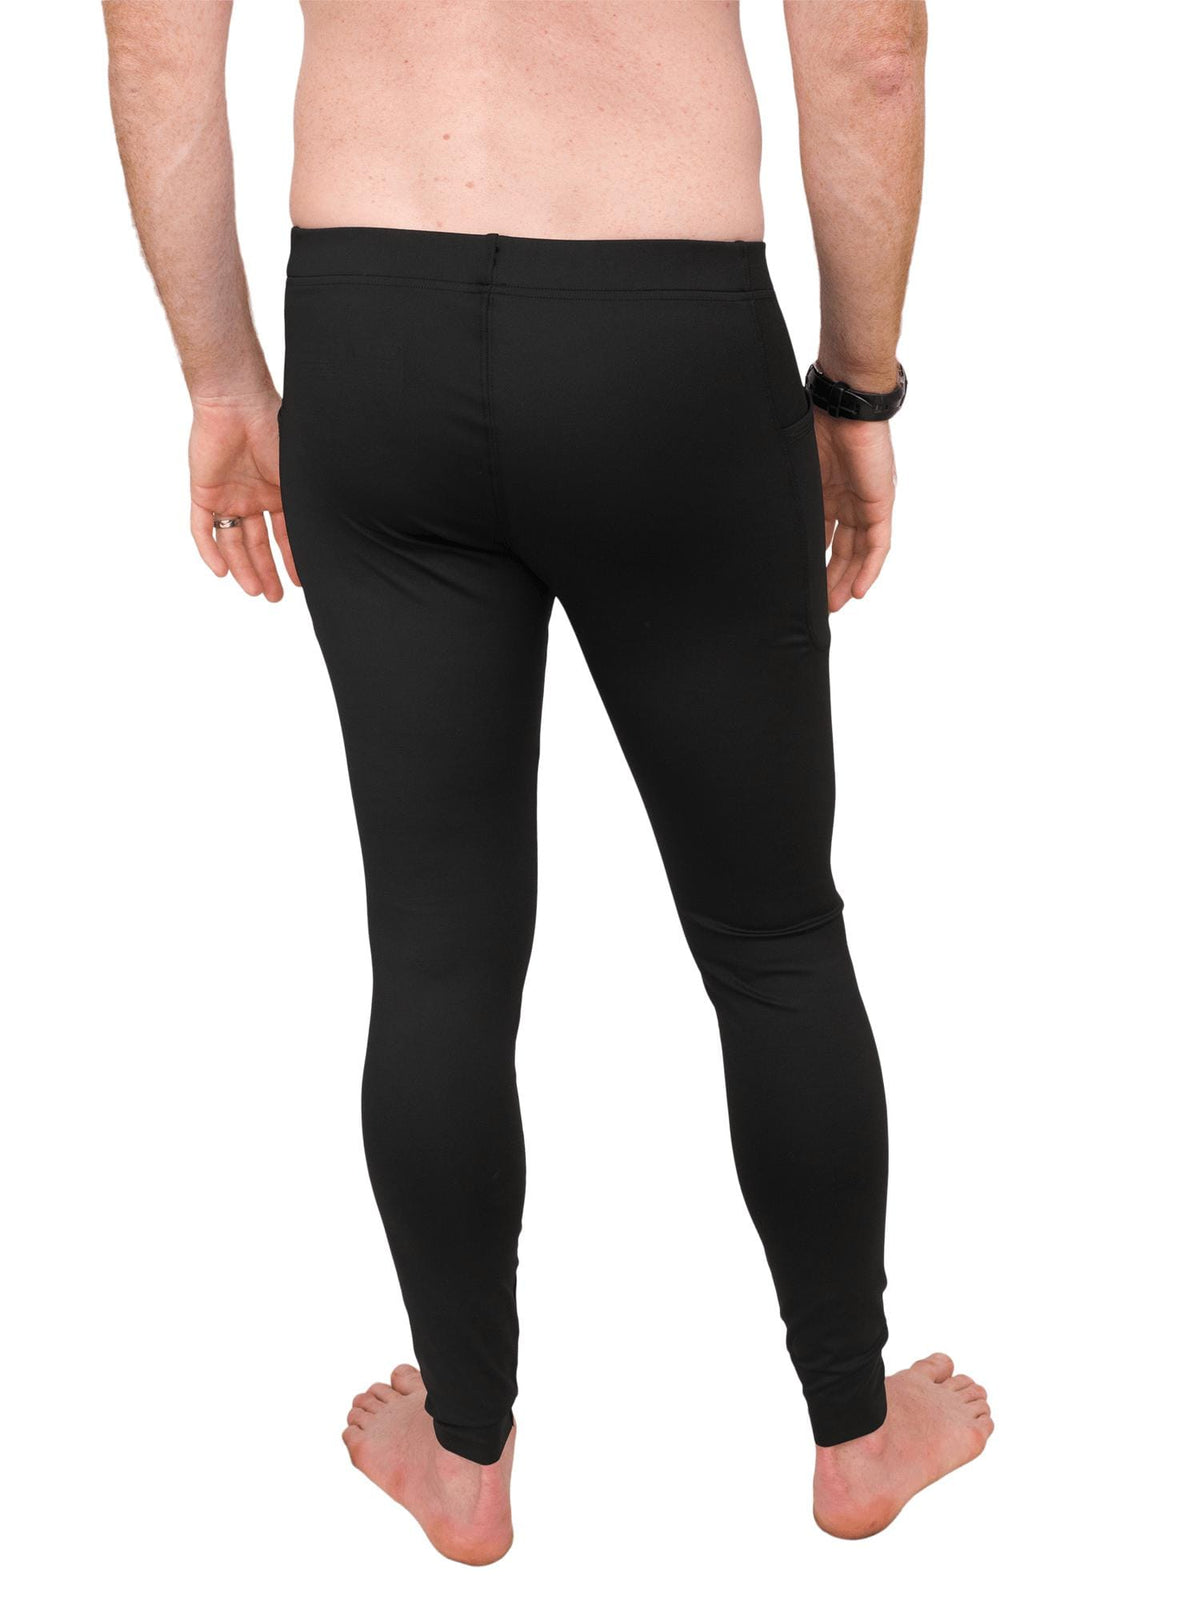 Model: Patrick is the CEO and founder of Waterlust. He is 6&#39;1&quot;, 175lbs and wearing a size L legging.